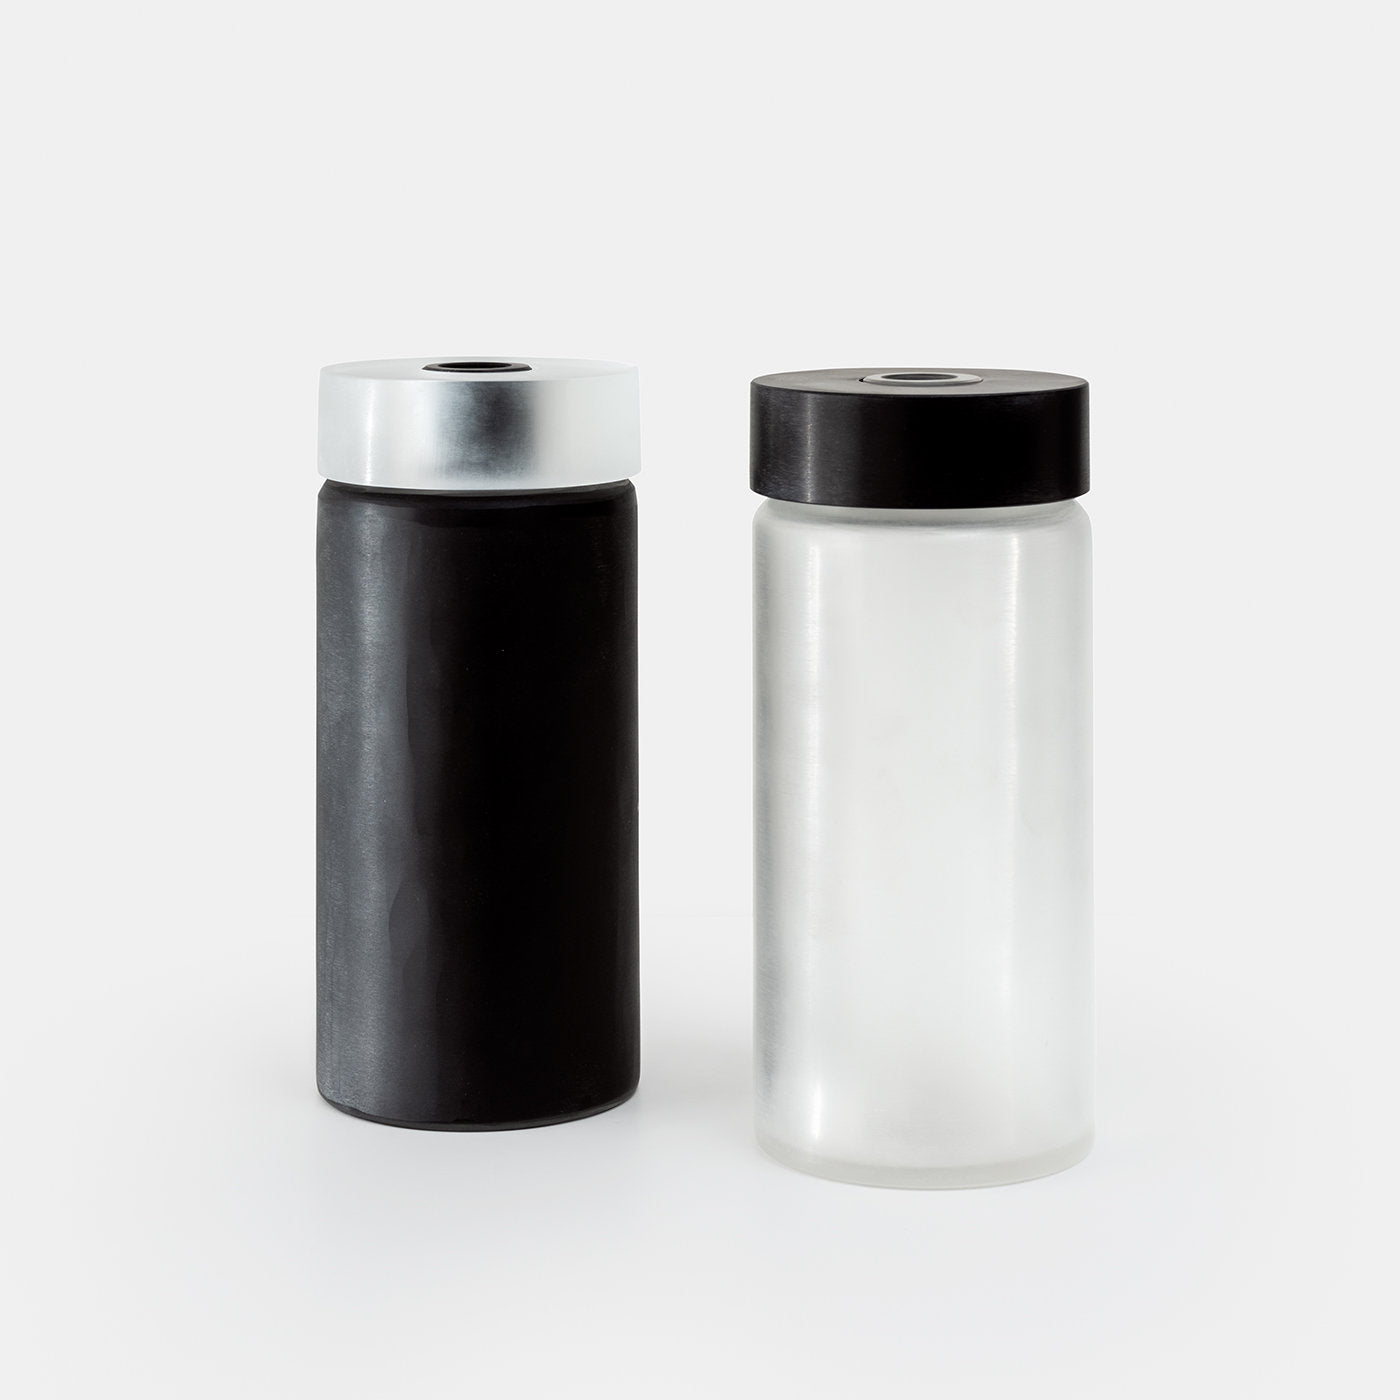 The Tall Cylinder Glass Vase in White and Black - Alternative view 1